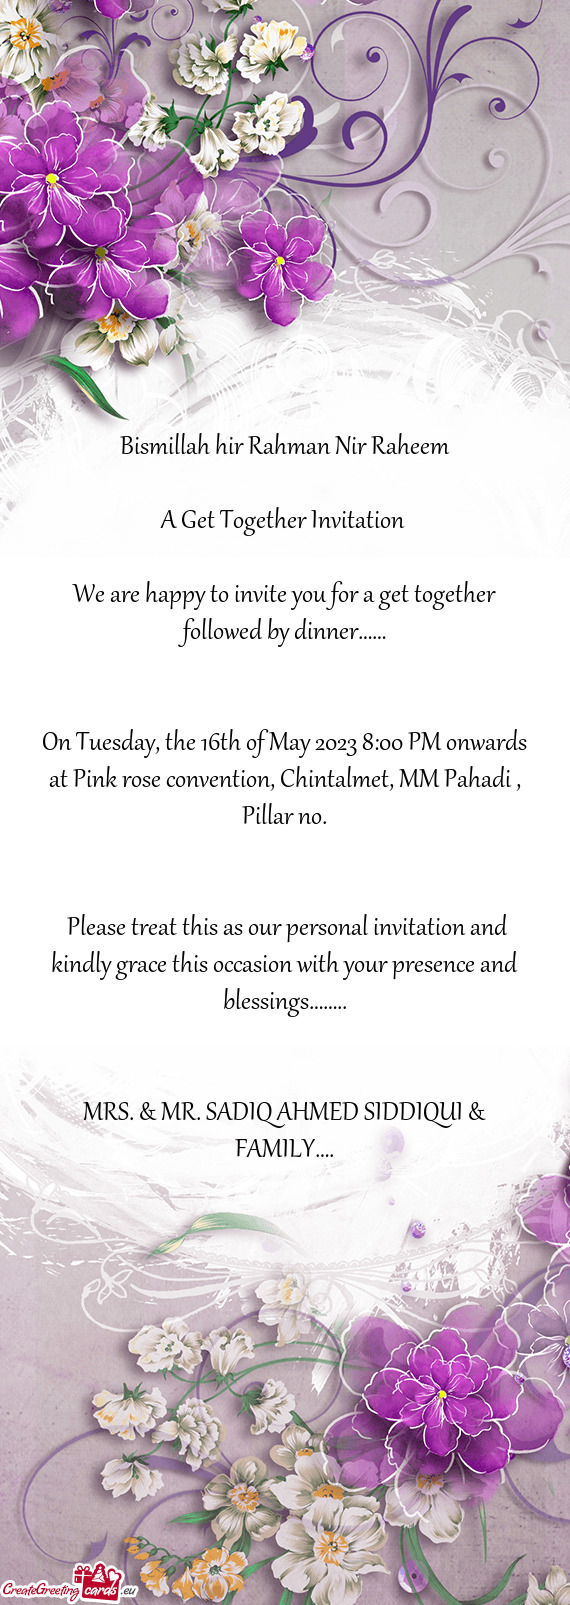 We are happy to invite you for a get together followed by dinner……